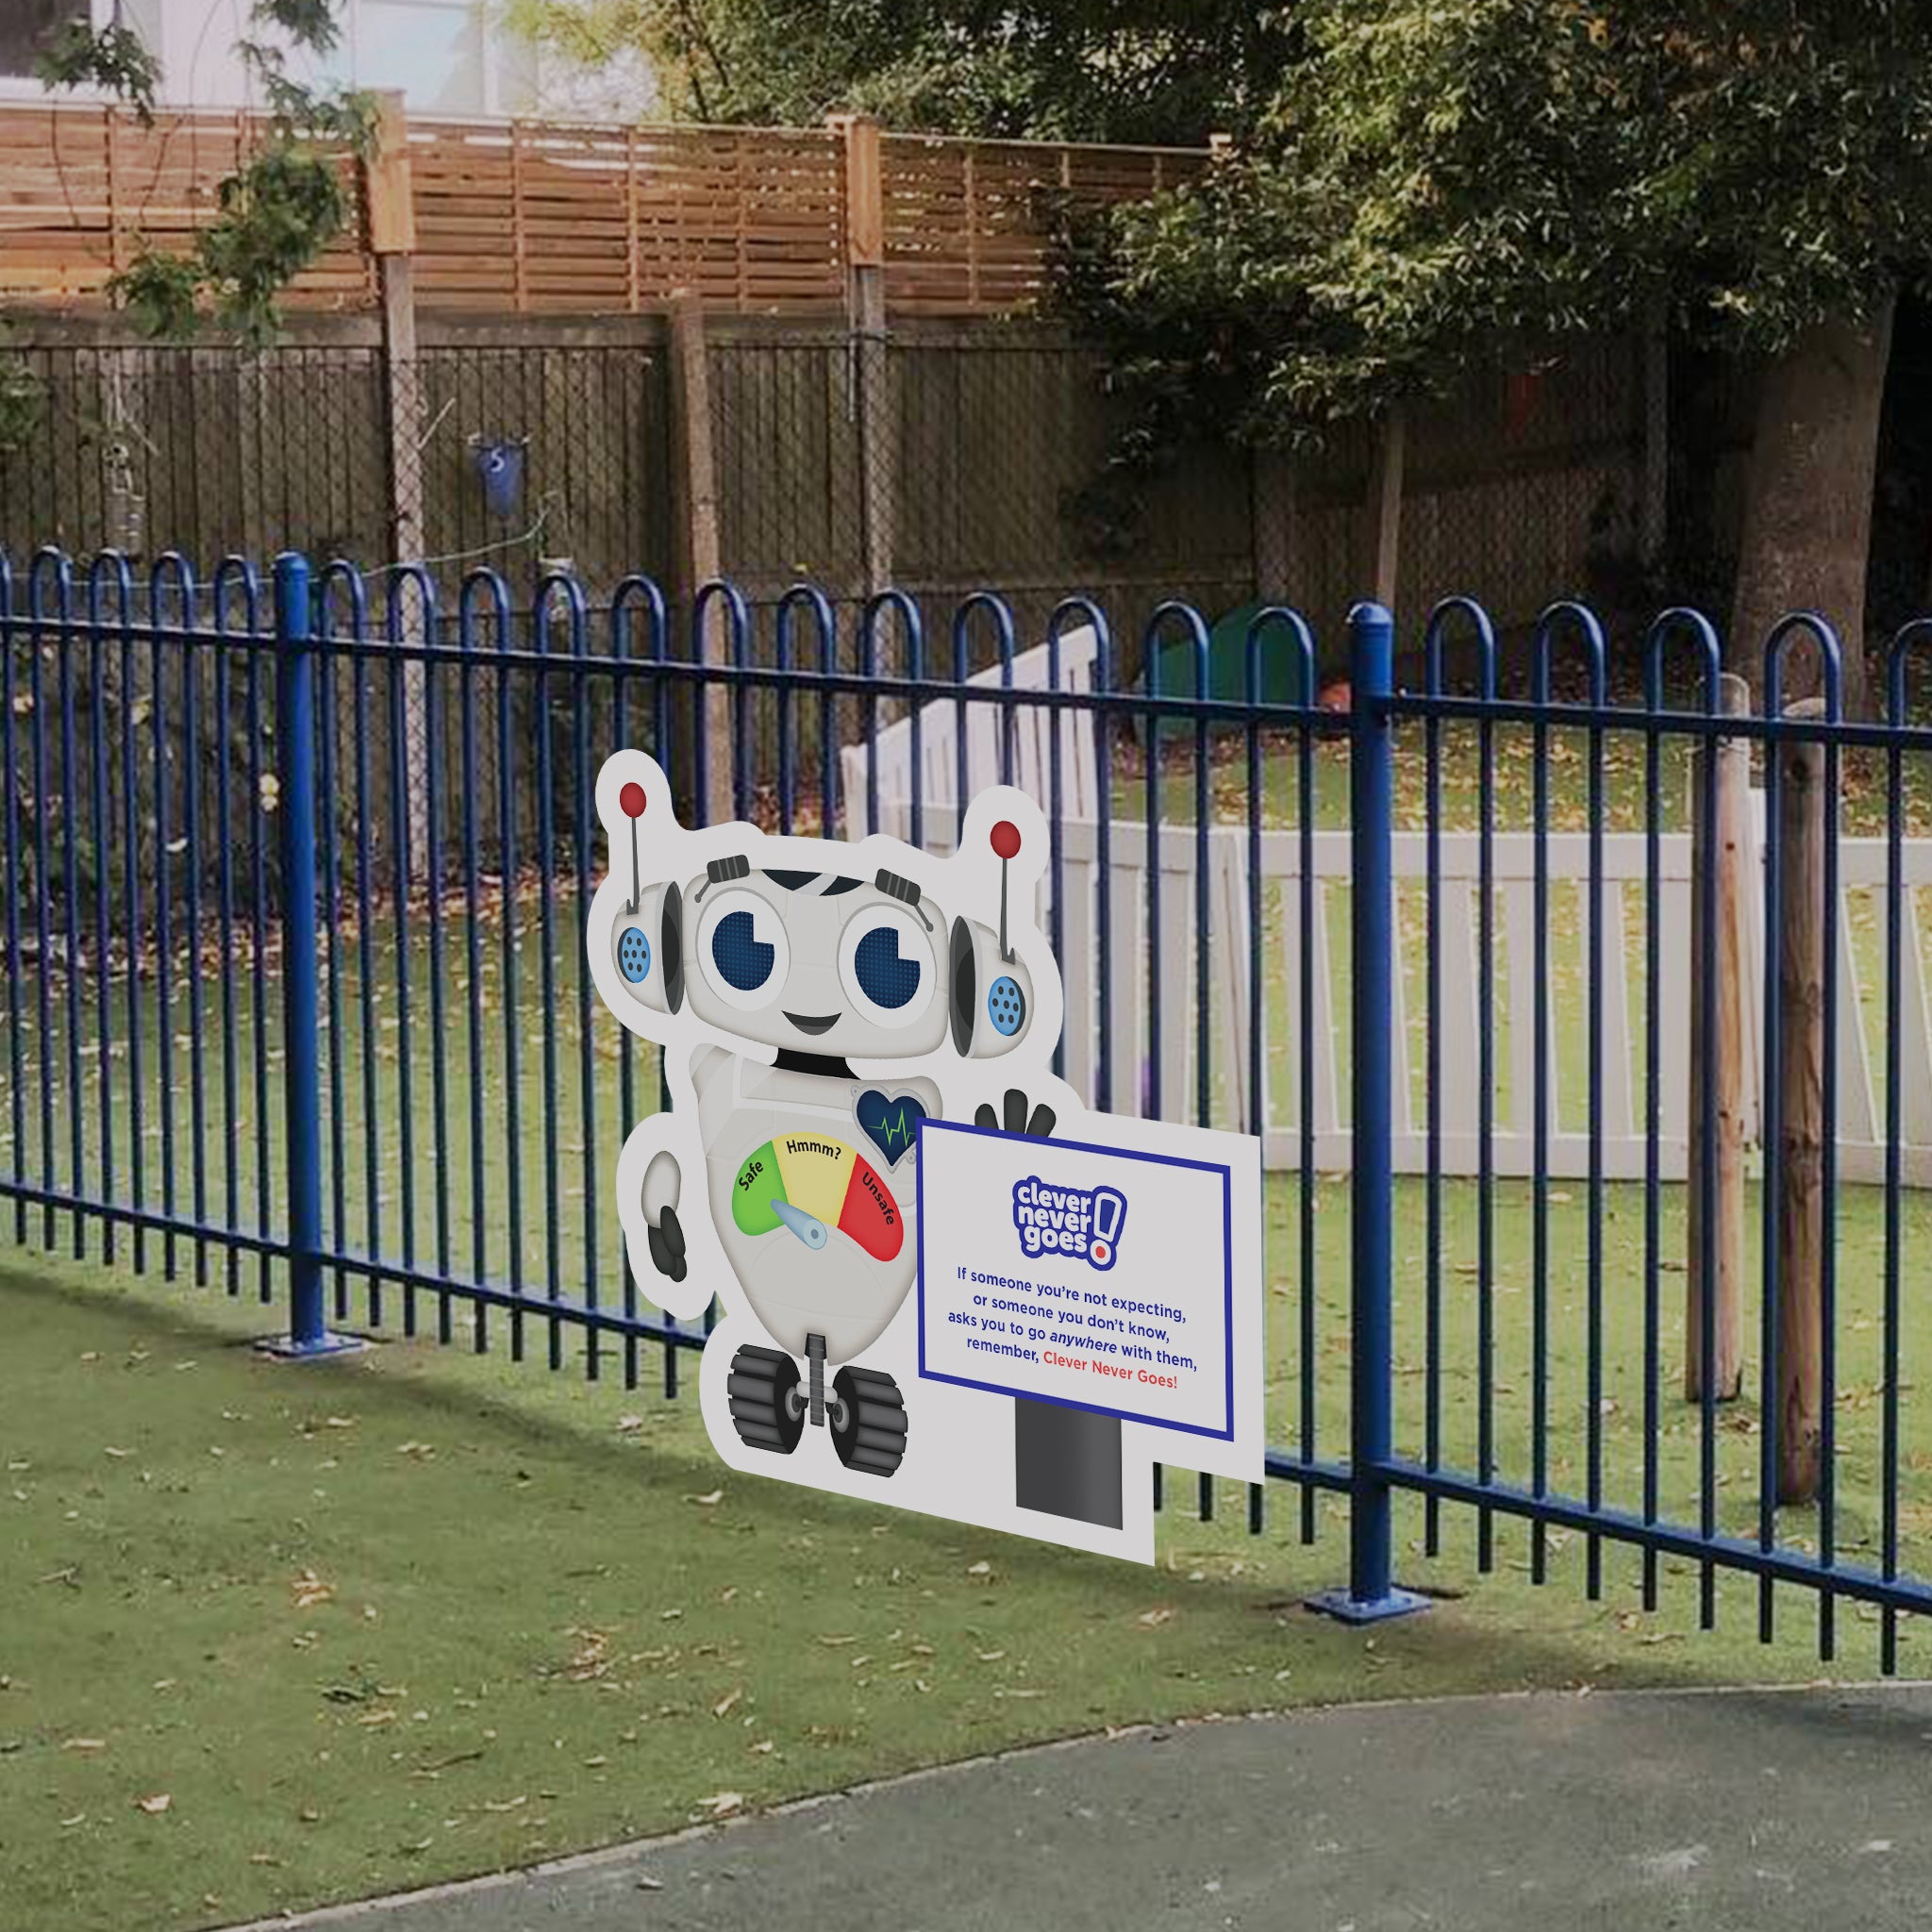 Clever the Robot Cutout 1.2m - Cutout for School Wall or Railings